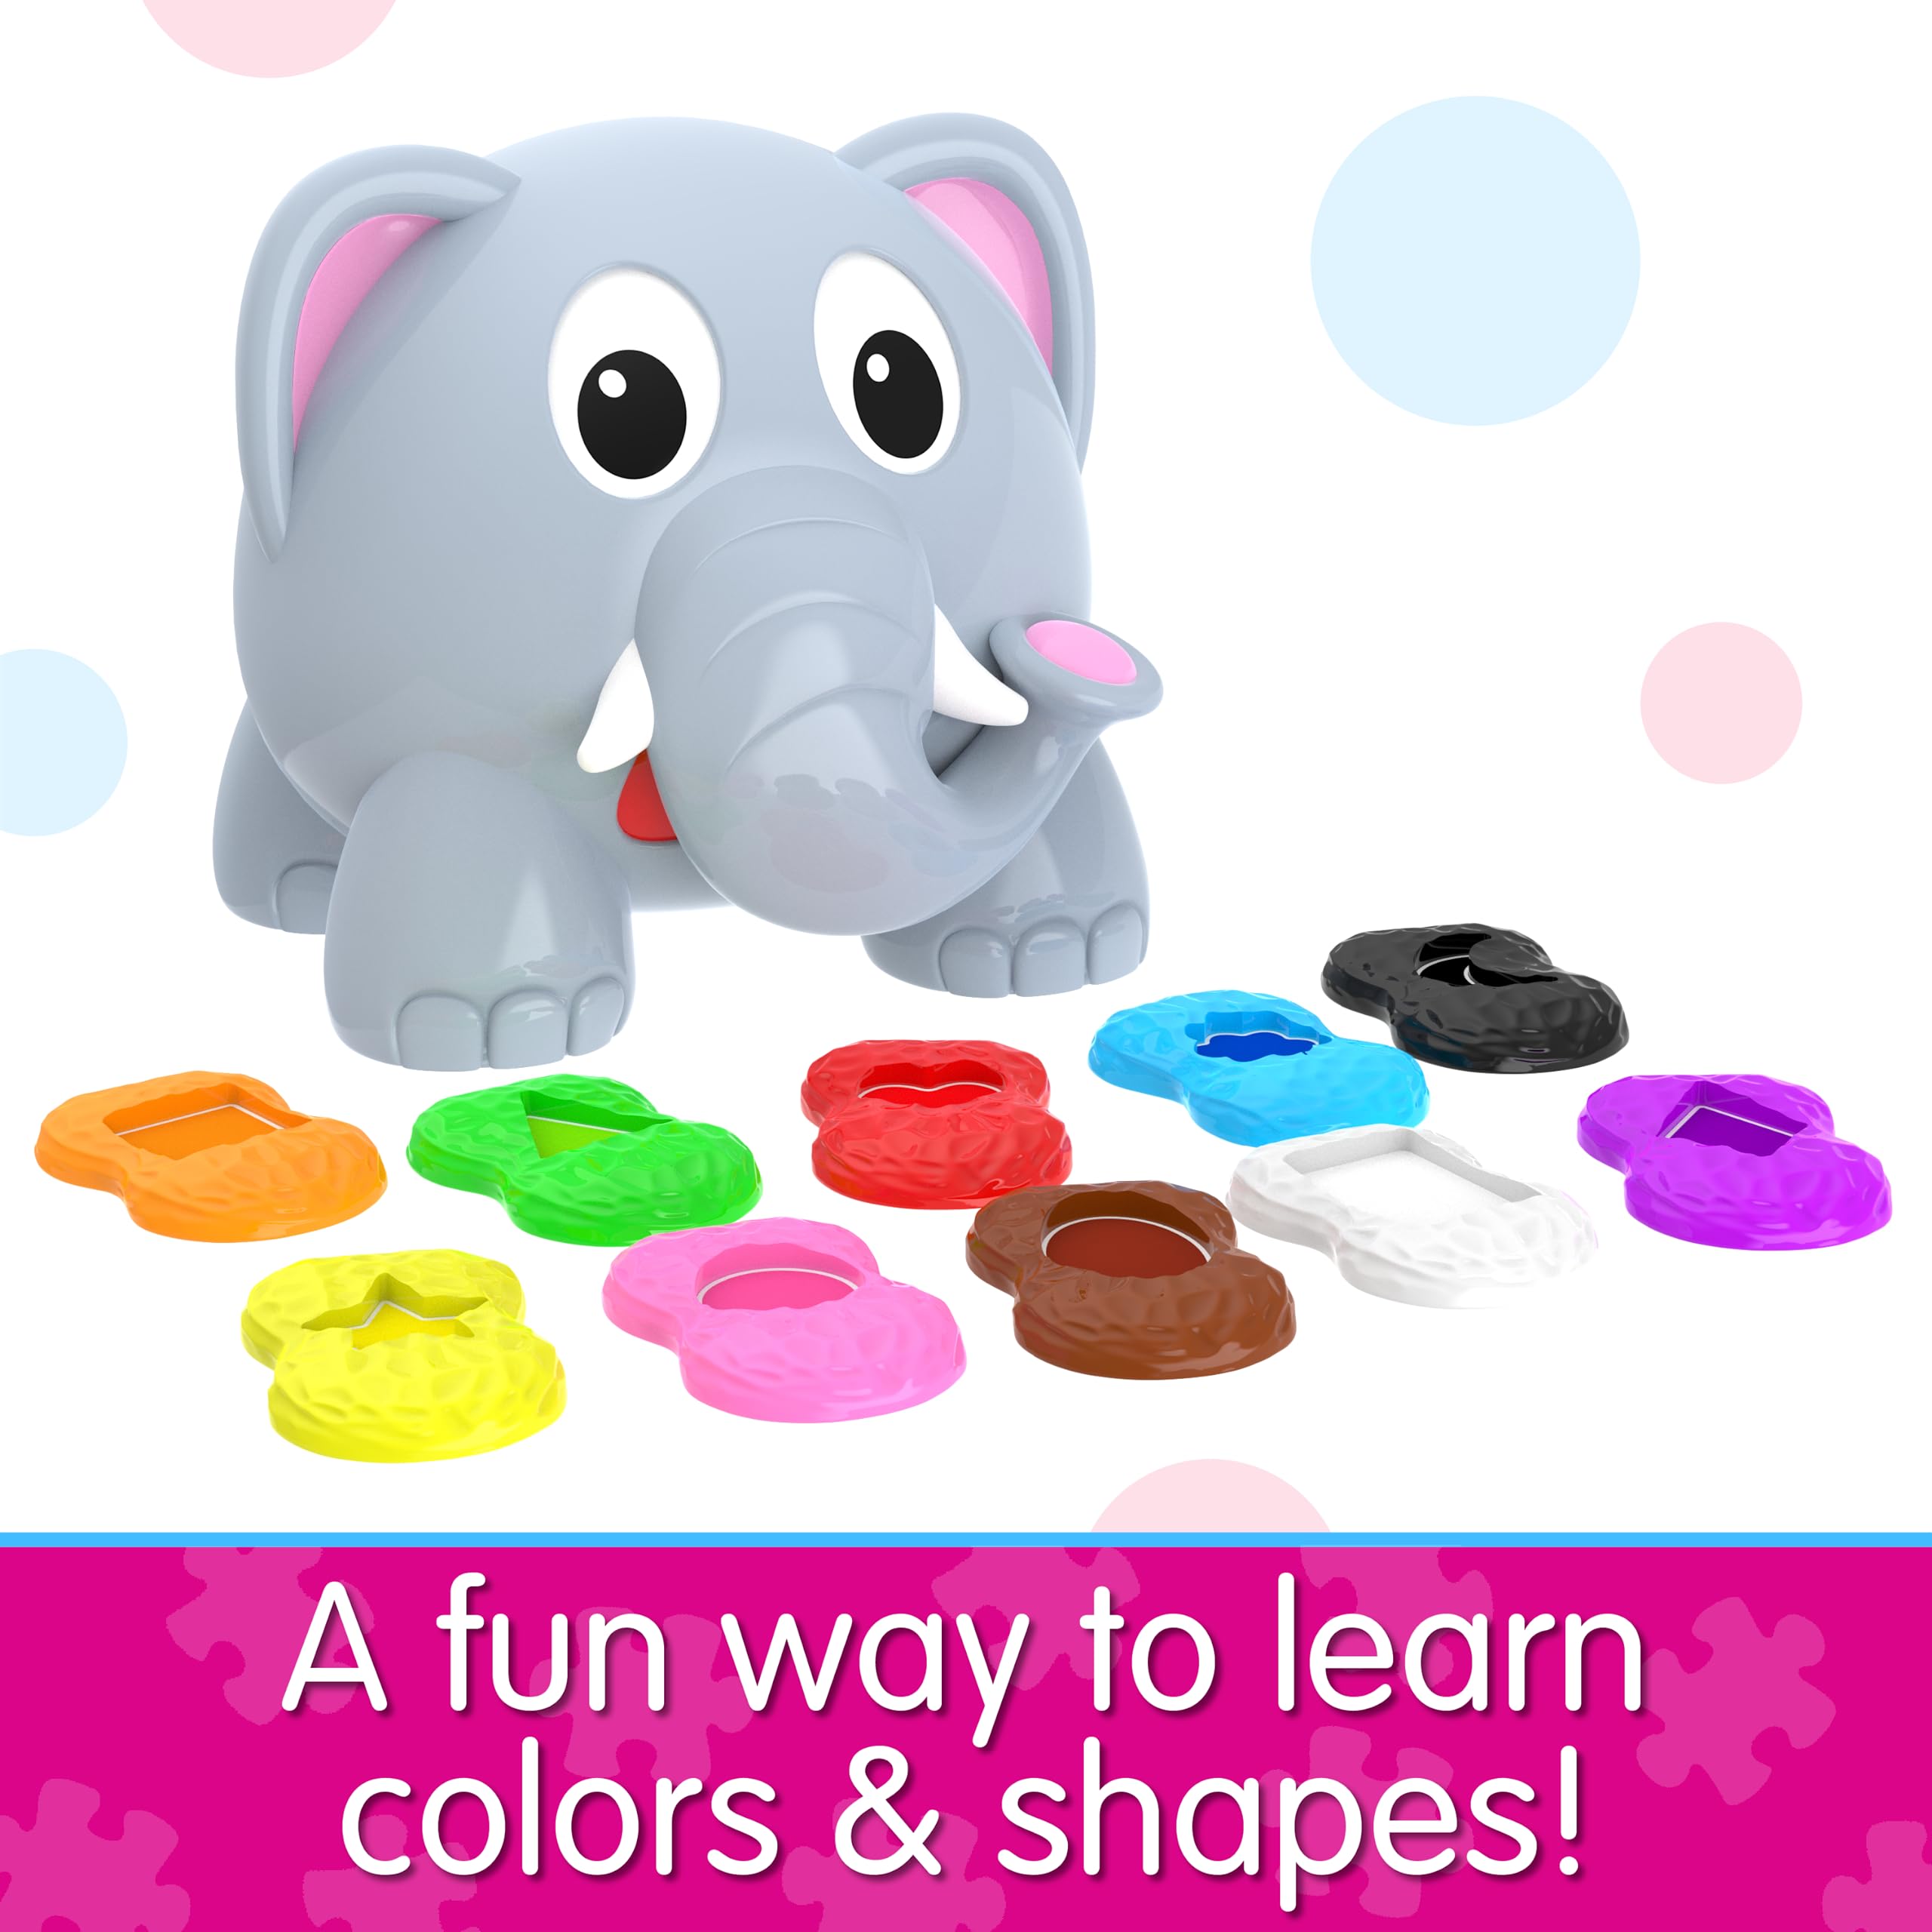 The Learning Journey: Learn with Me - Shapes Elephant - Color & Shapes Teaching First Learning Toys for Toddlers - Gifts for Boys & Girls Ages 2 Years and Up - Preschool Learning Toy